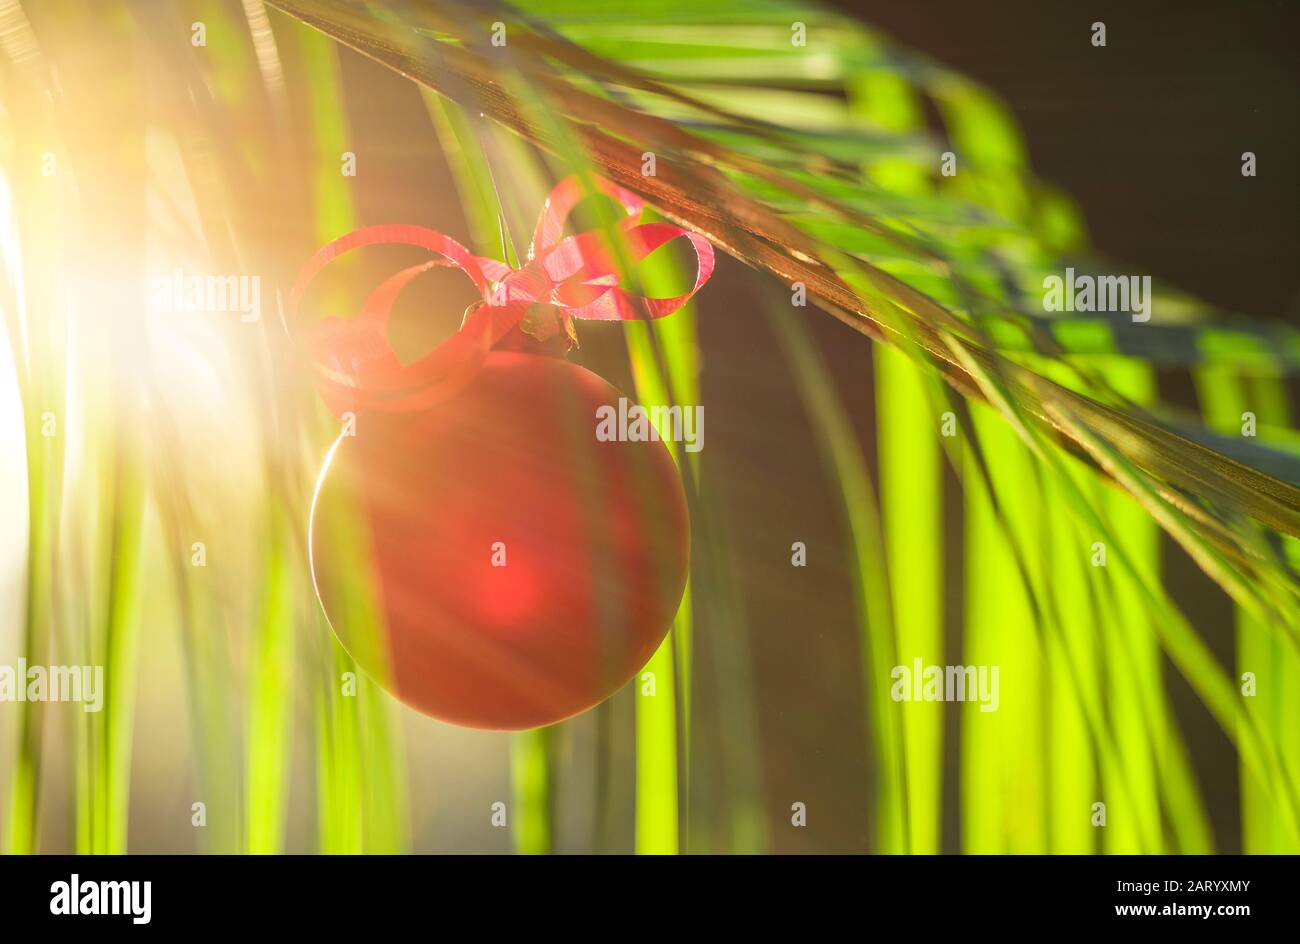 Red bauble hanging from plant Stock Photo